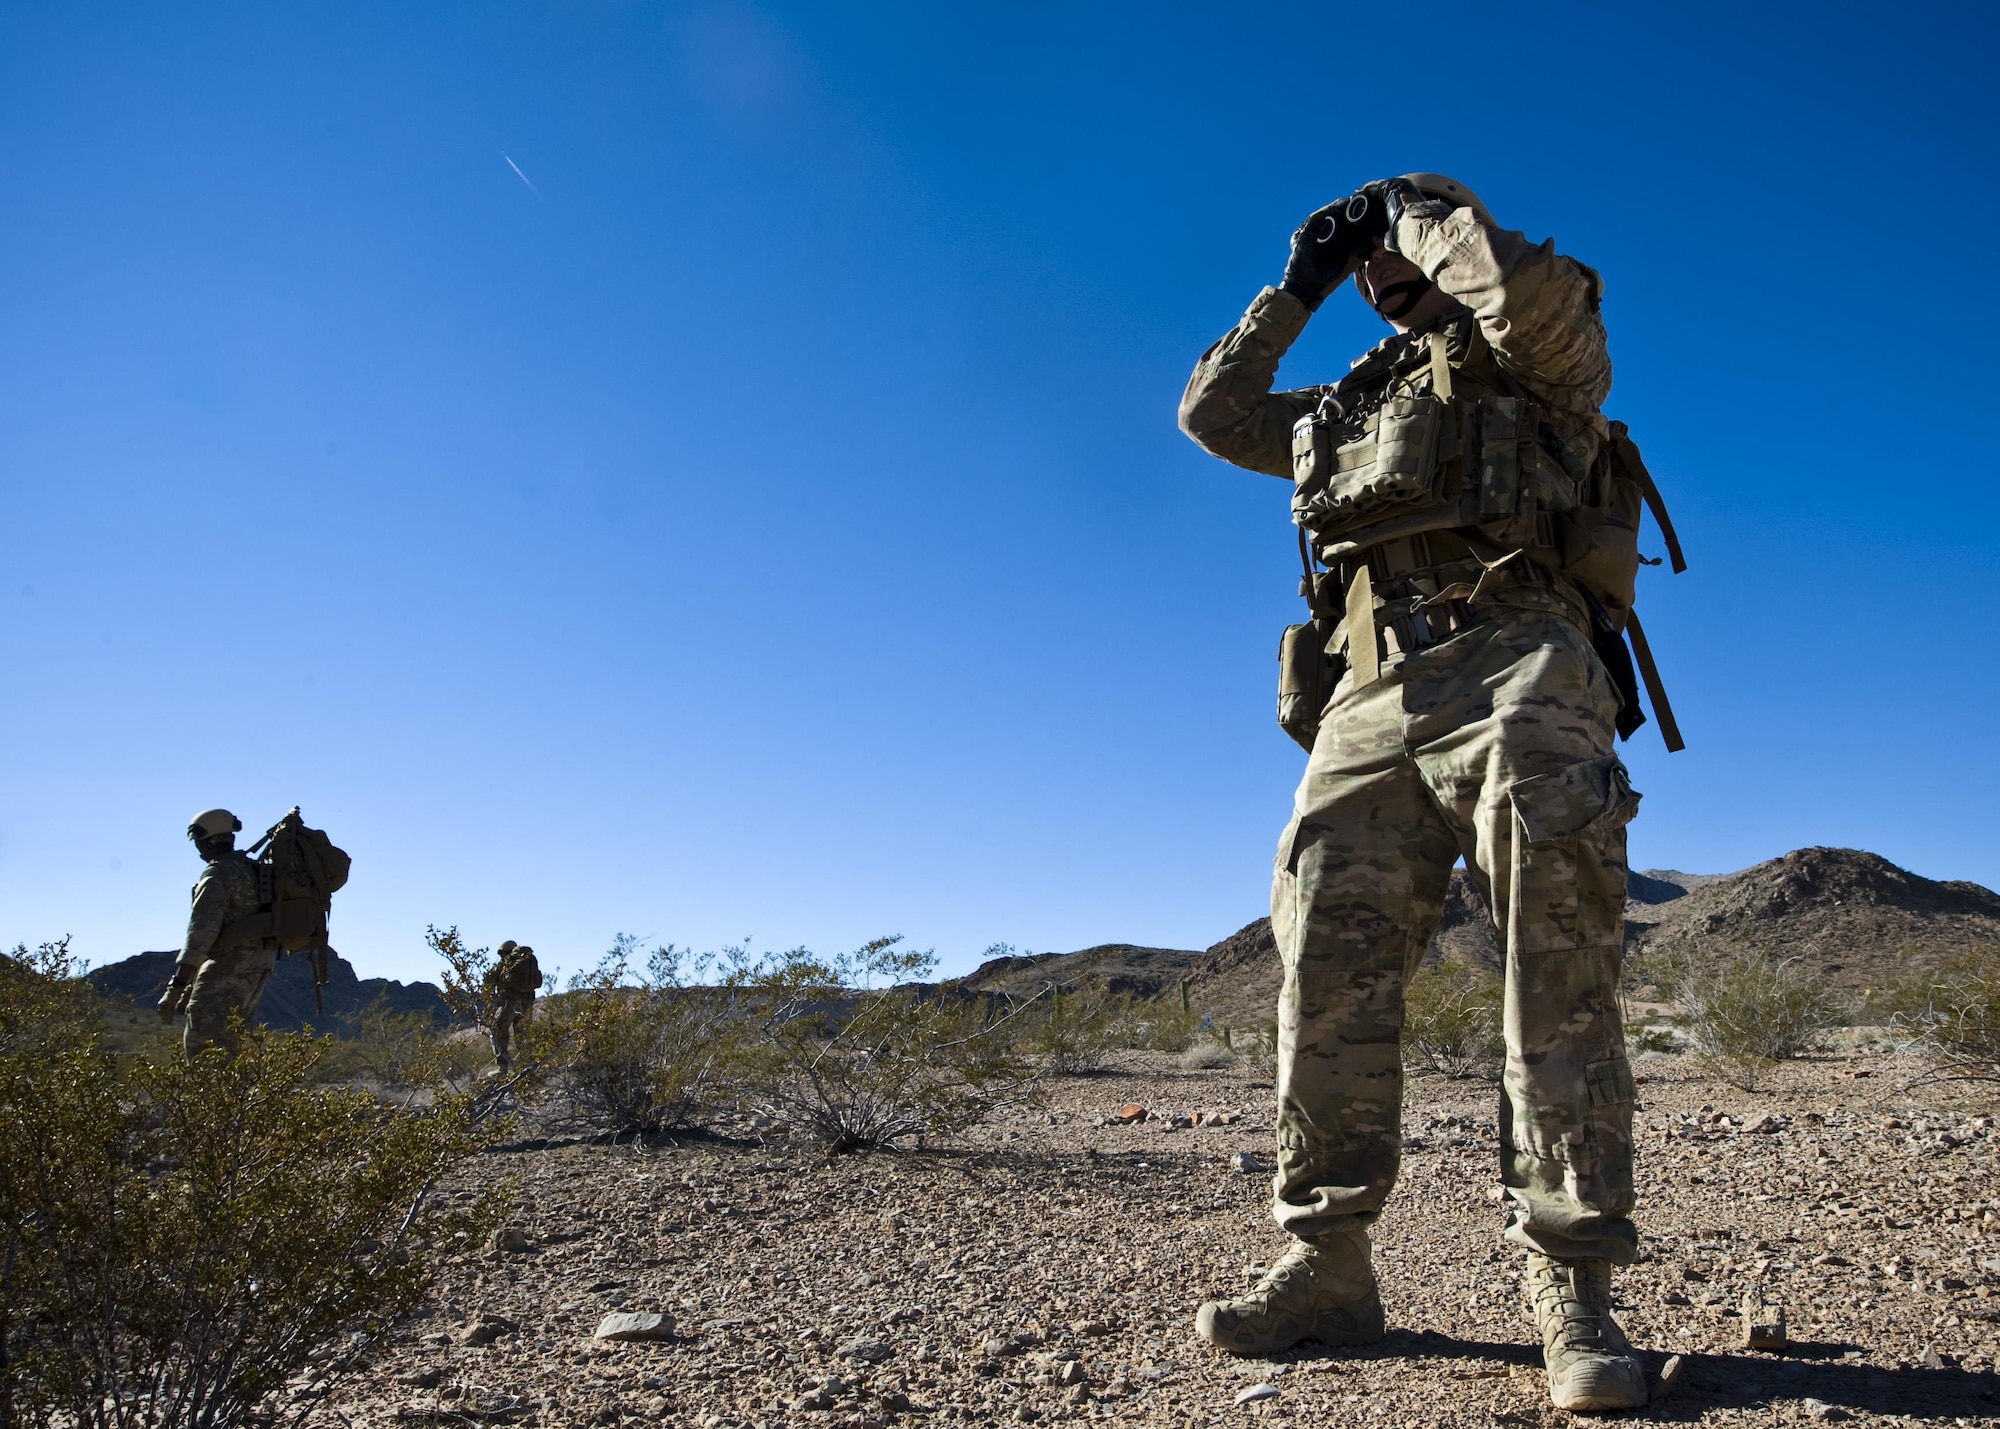 Staff Sgt. Daniel Esselstrom performs long-range reconnaissance to locate emplaced improvised explosive devices at Nellis Air Force Base, Nev. During the Global Counter-IED Threat Assessment Course, here, EOD teams are tested with a wide variety of scenarios including missions navigating challenging terrain “on foot” with limited resources. Esselstrom is with the 23rd Civil Engineer Squadron, Moody AFB, Ga. (U.S. Air Force photo/Airman 1st Class Christopher Tam)